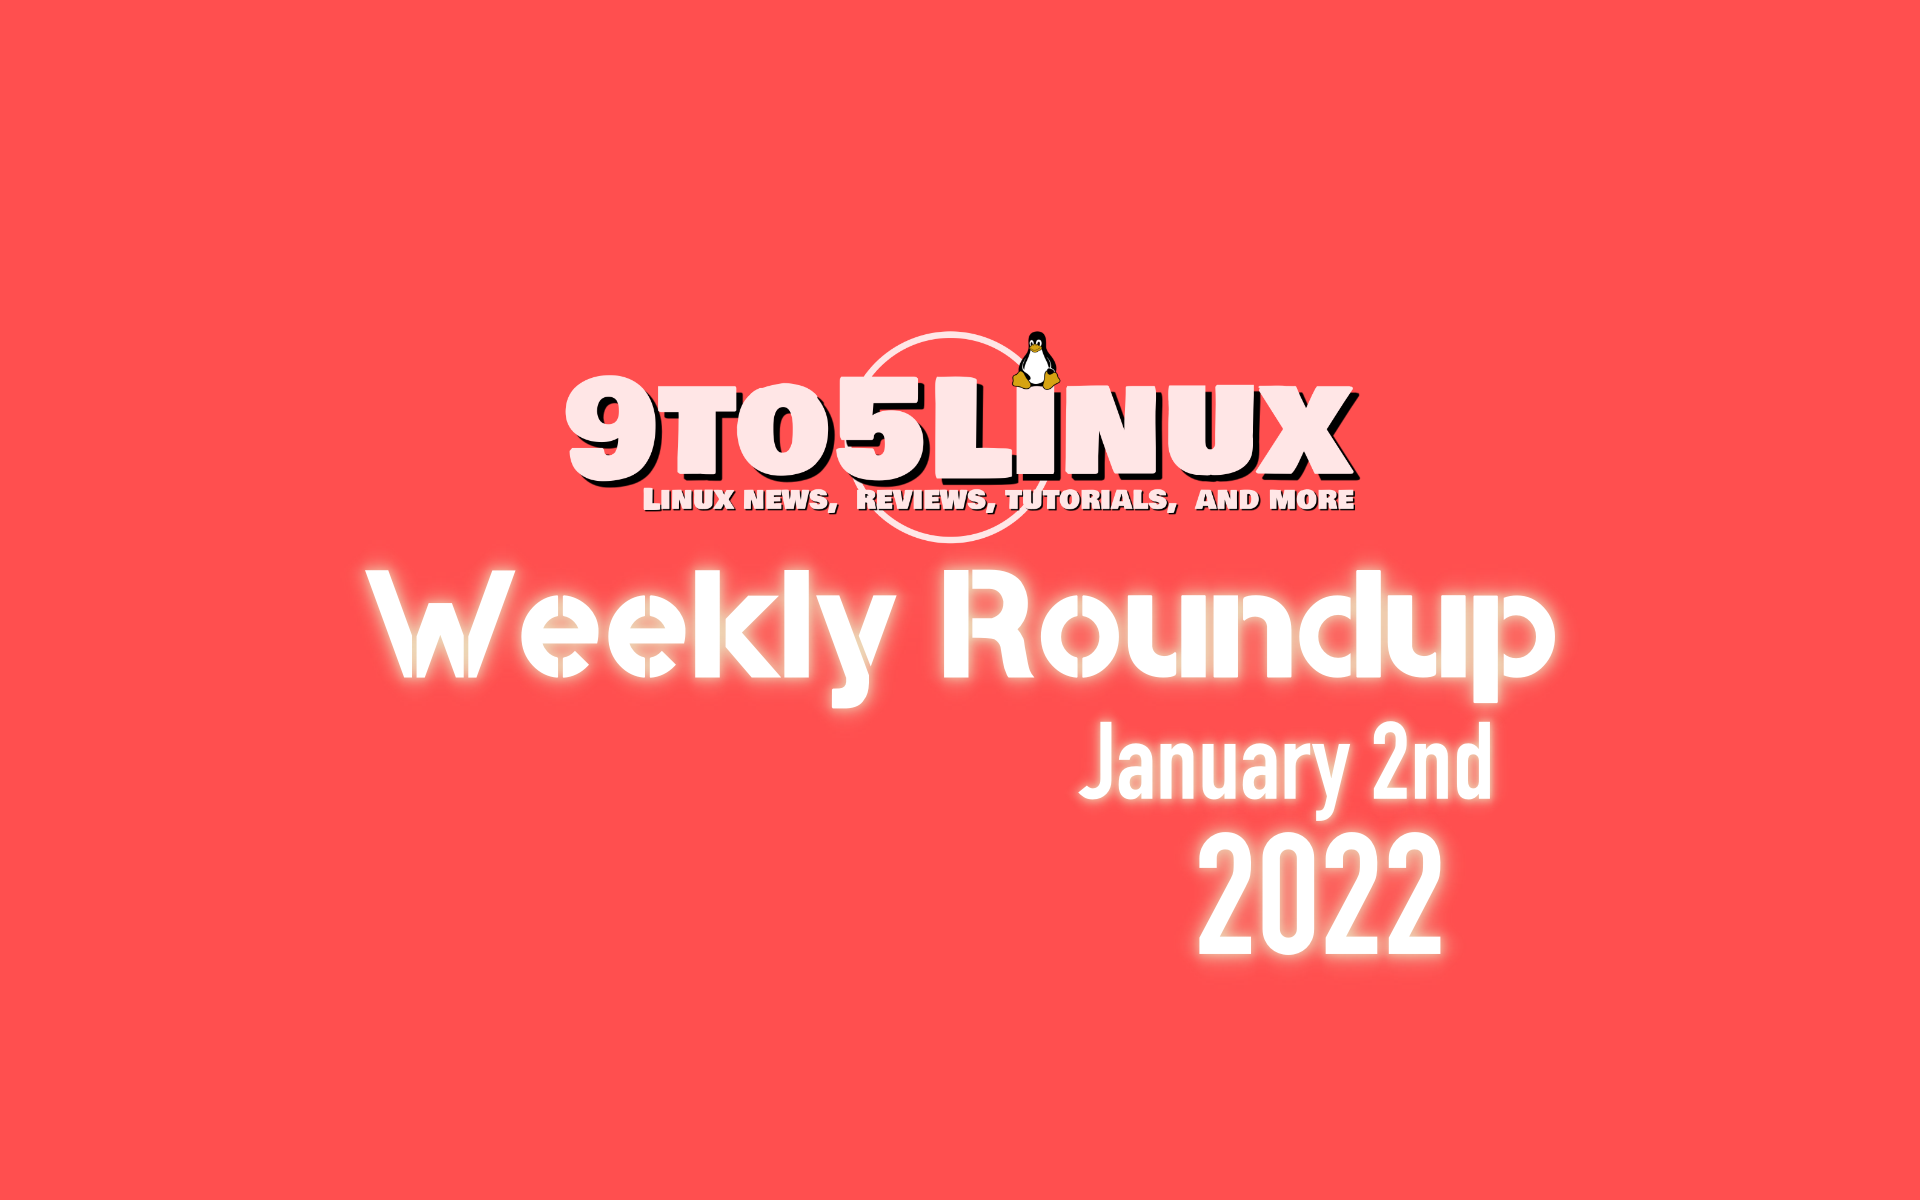 9to5Linux Weekly Roundup: January 2nd, 2022